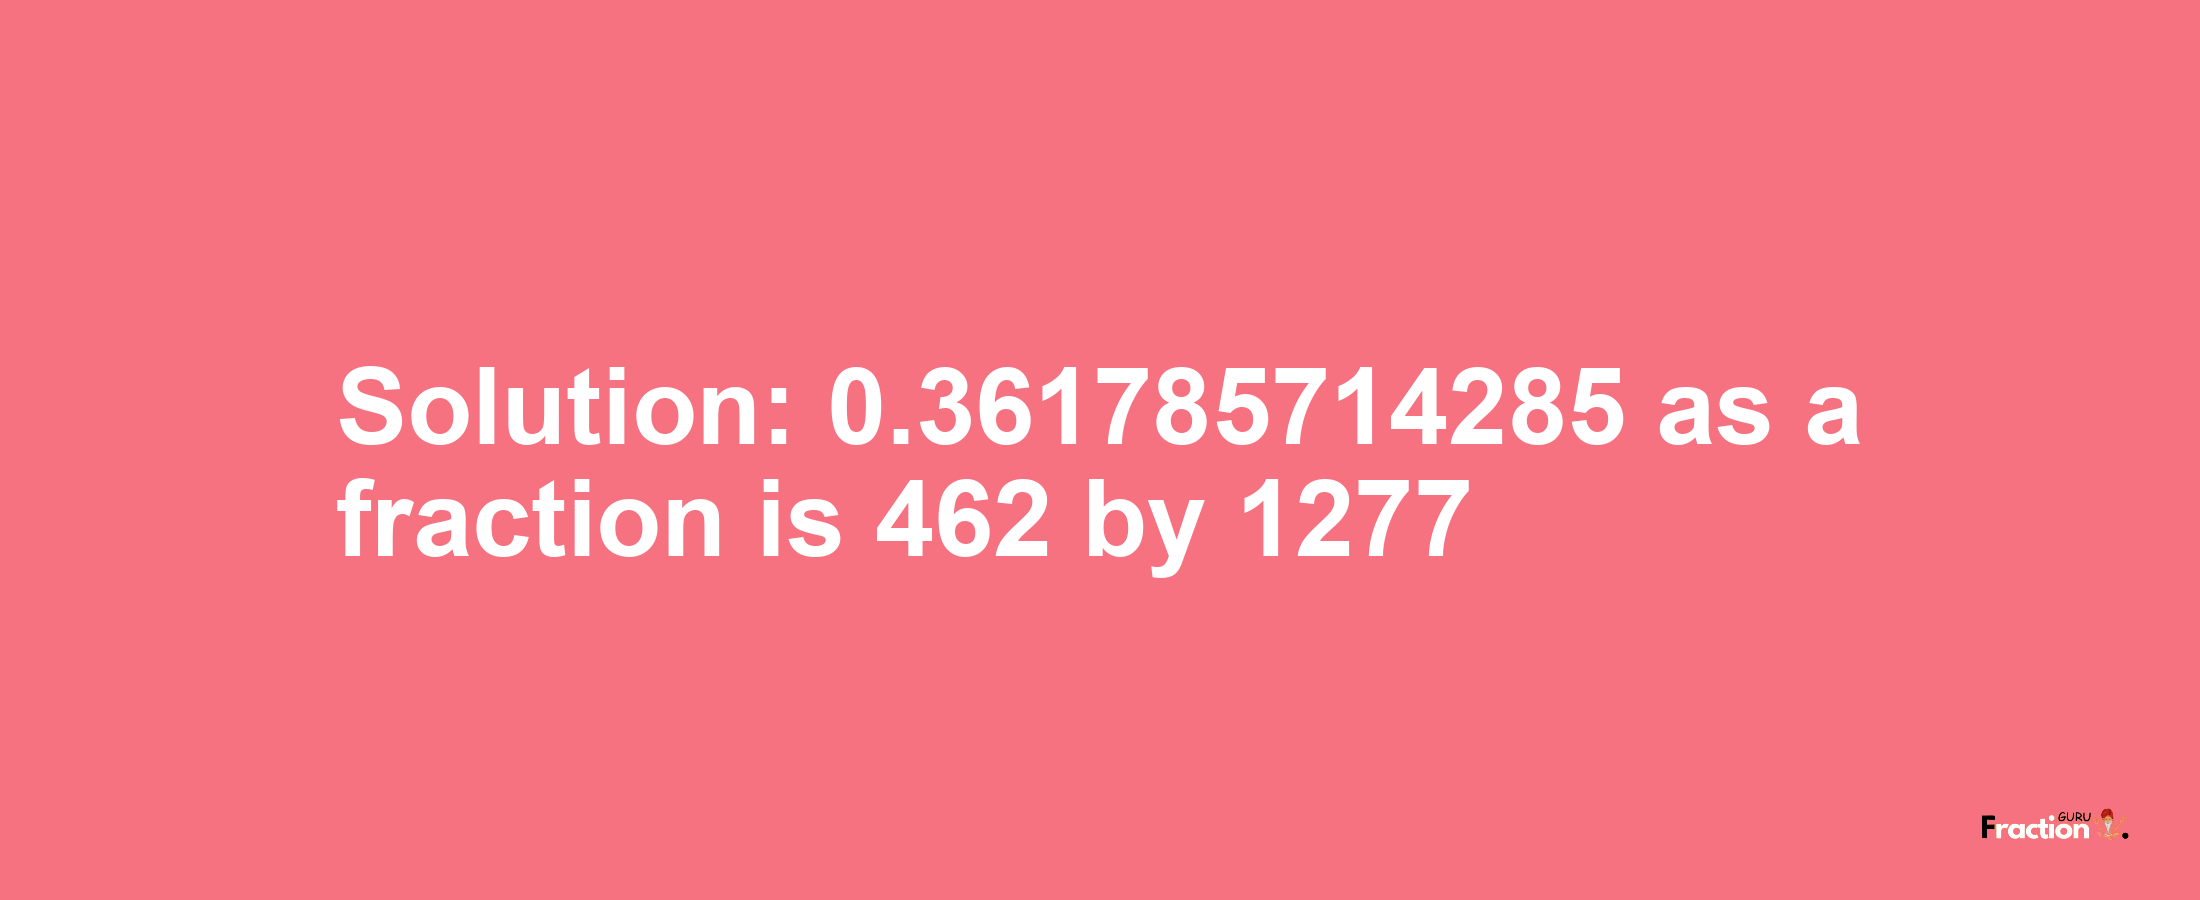 Solution:0.361785714285 as a fraction is 462/1277